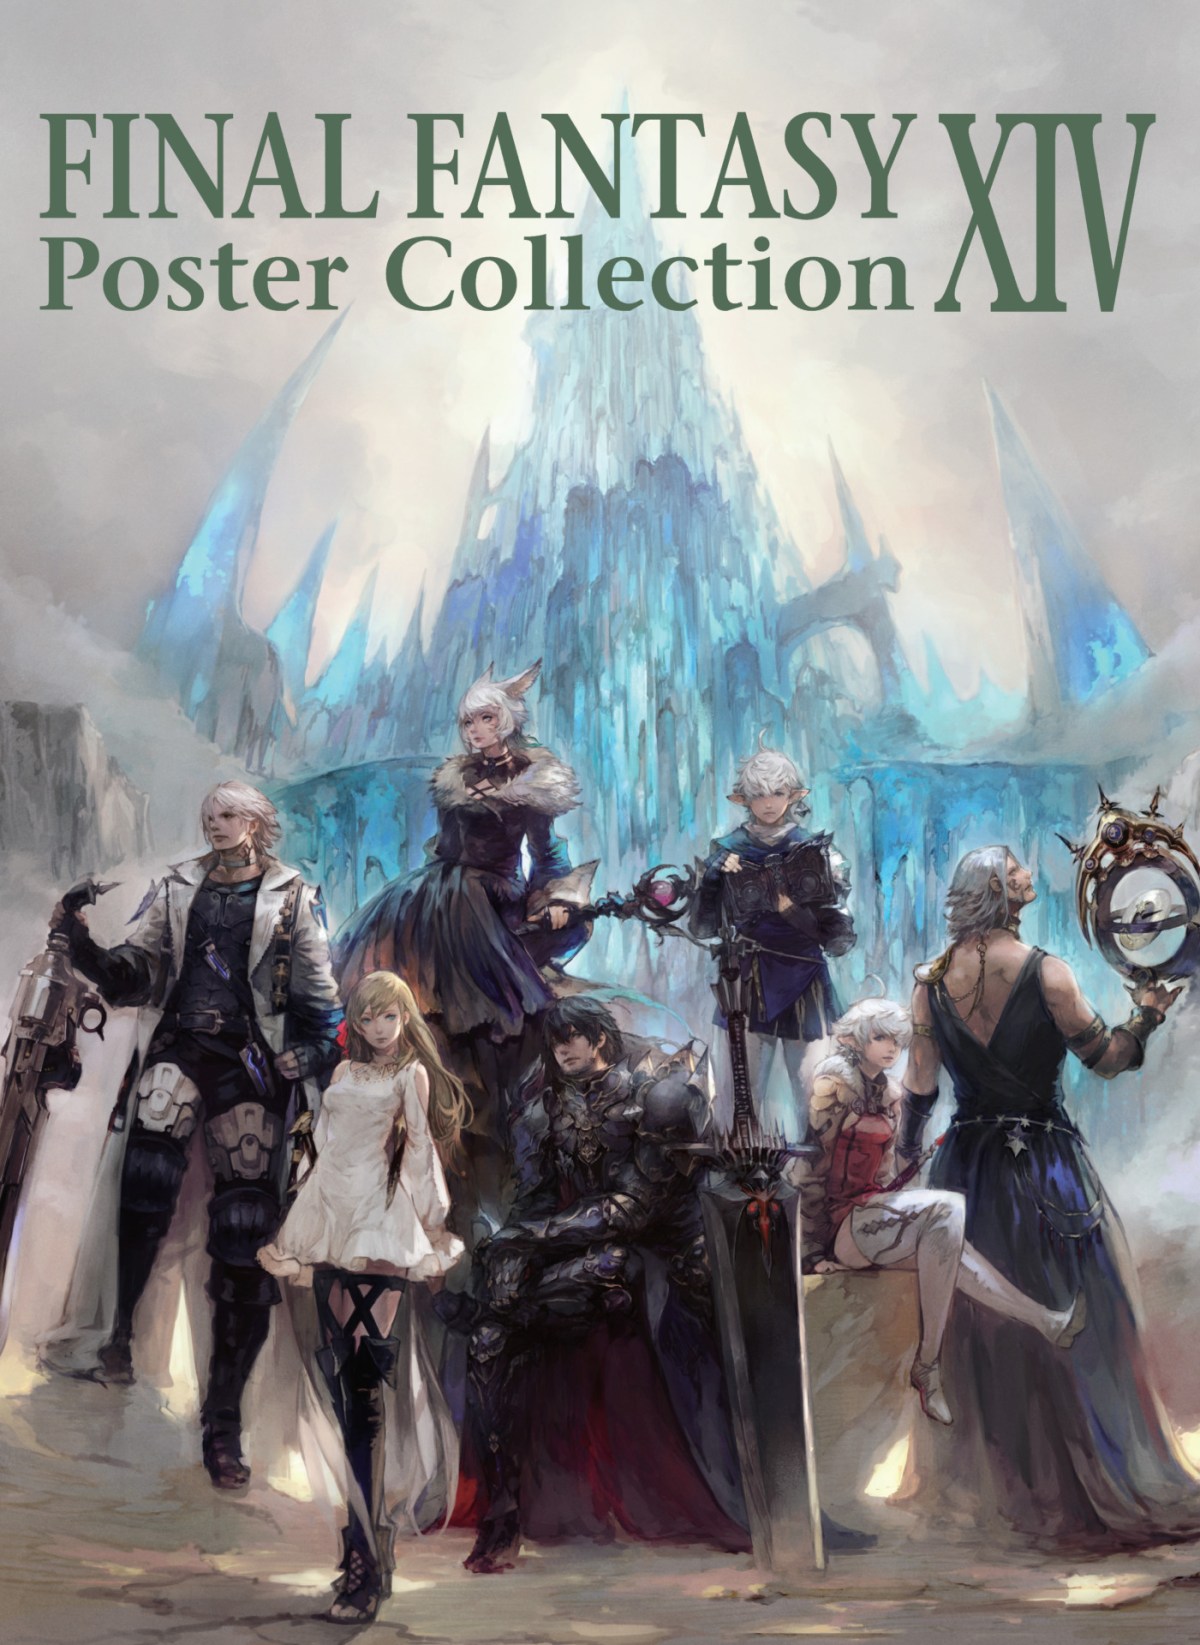 FFXIV Posters Collection